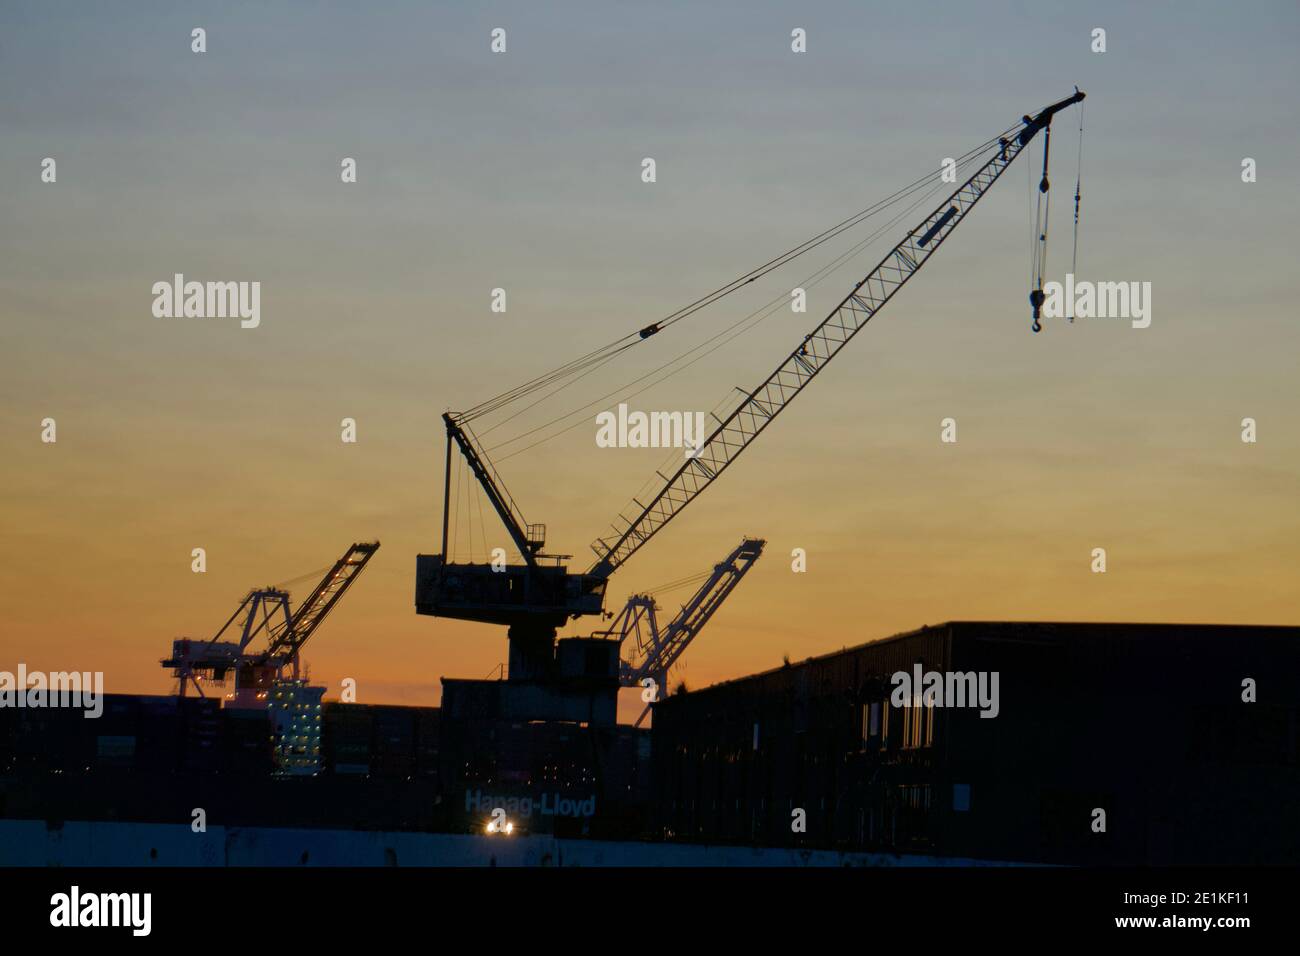 Seaport international trade shipping cranes at sunset. Machinery silhouette. Outer Harbor, Port of Oakland, California, USA Stock Photo